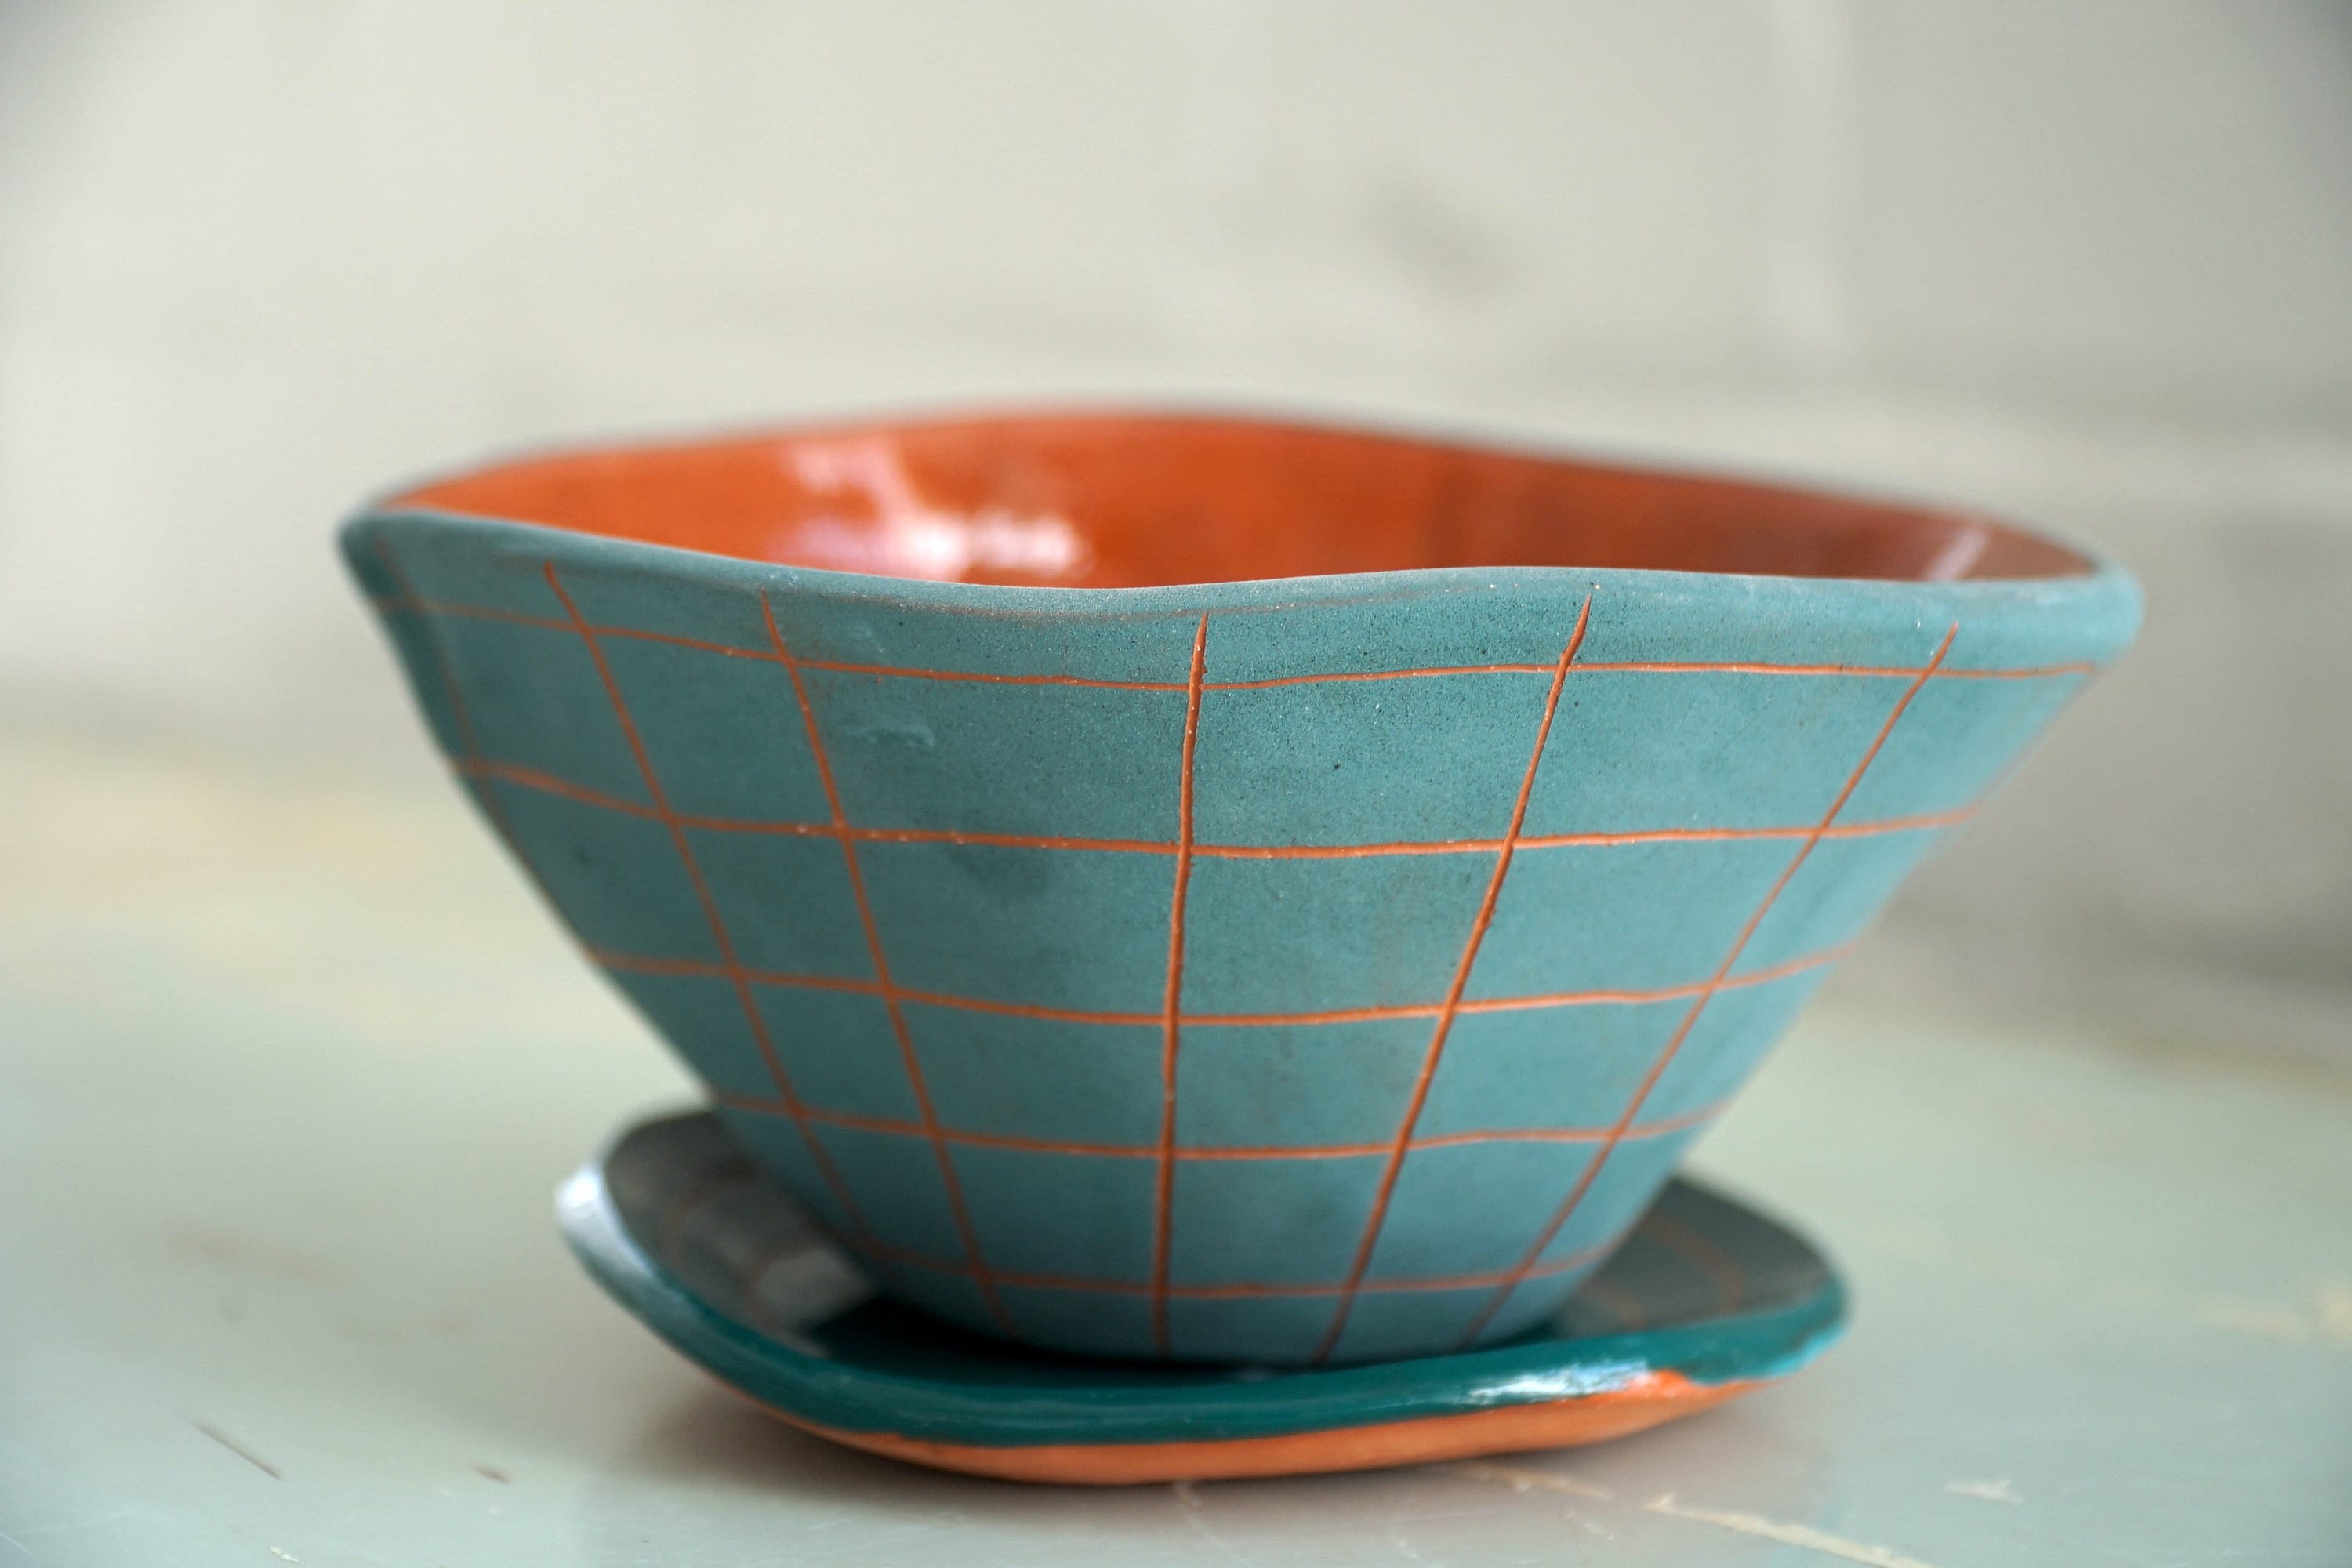 Teal and Terracotta Table Planter w/ "Grid" Design - Matching Tray - Succulent Planter - Small Plant Pot - Propagating Planter - Housewarming